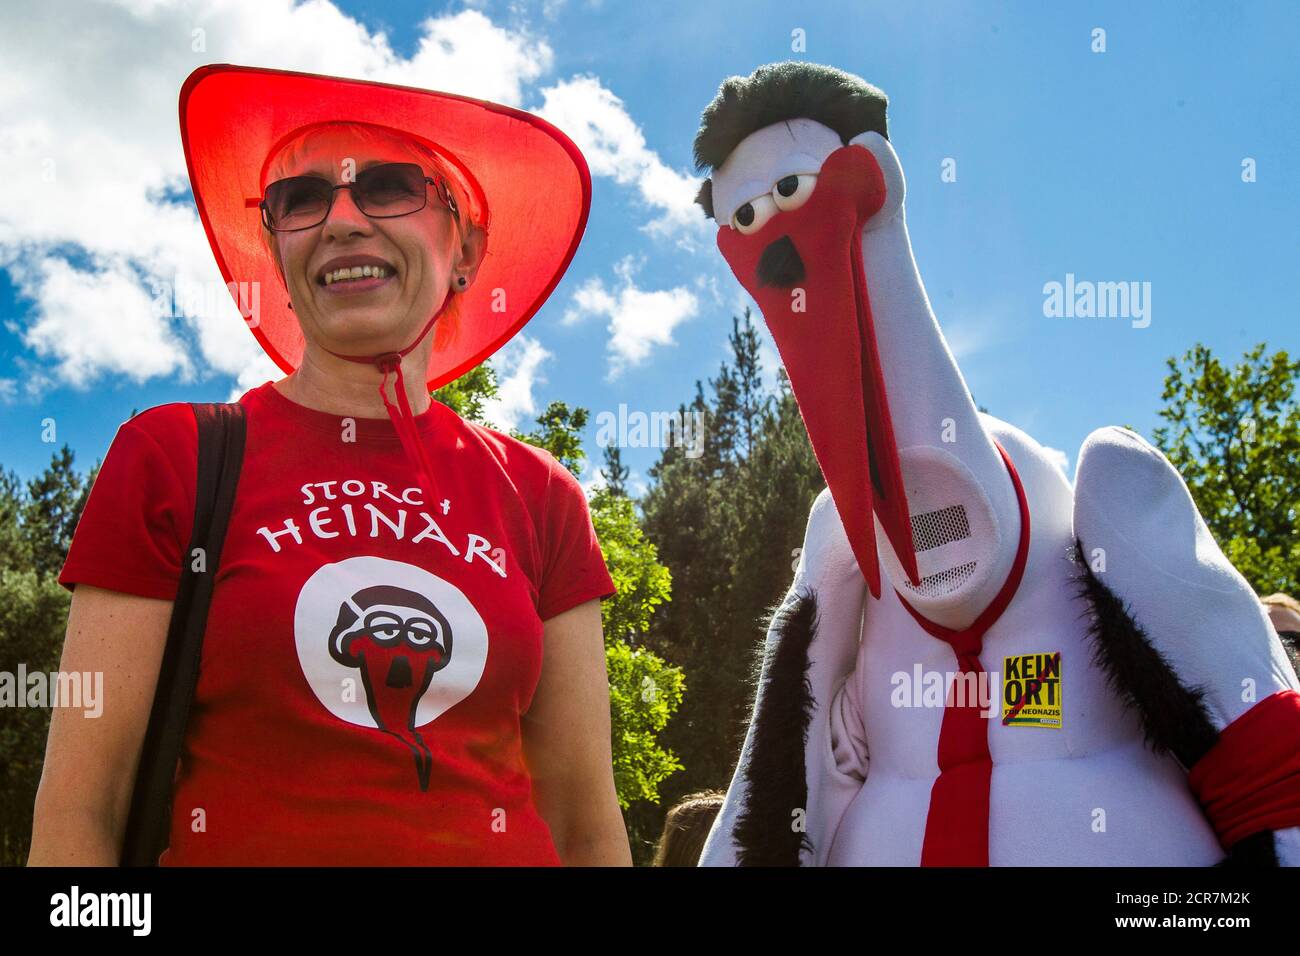 President of the Mecklenburg-Vorpommern state parliament Sylvia  Bretschneider (L) stands next to the Storch Heinar mascot during a protest  against a far-right festival outside the village of Viereck, some 130 km (81